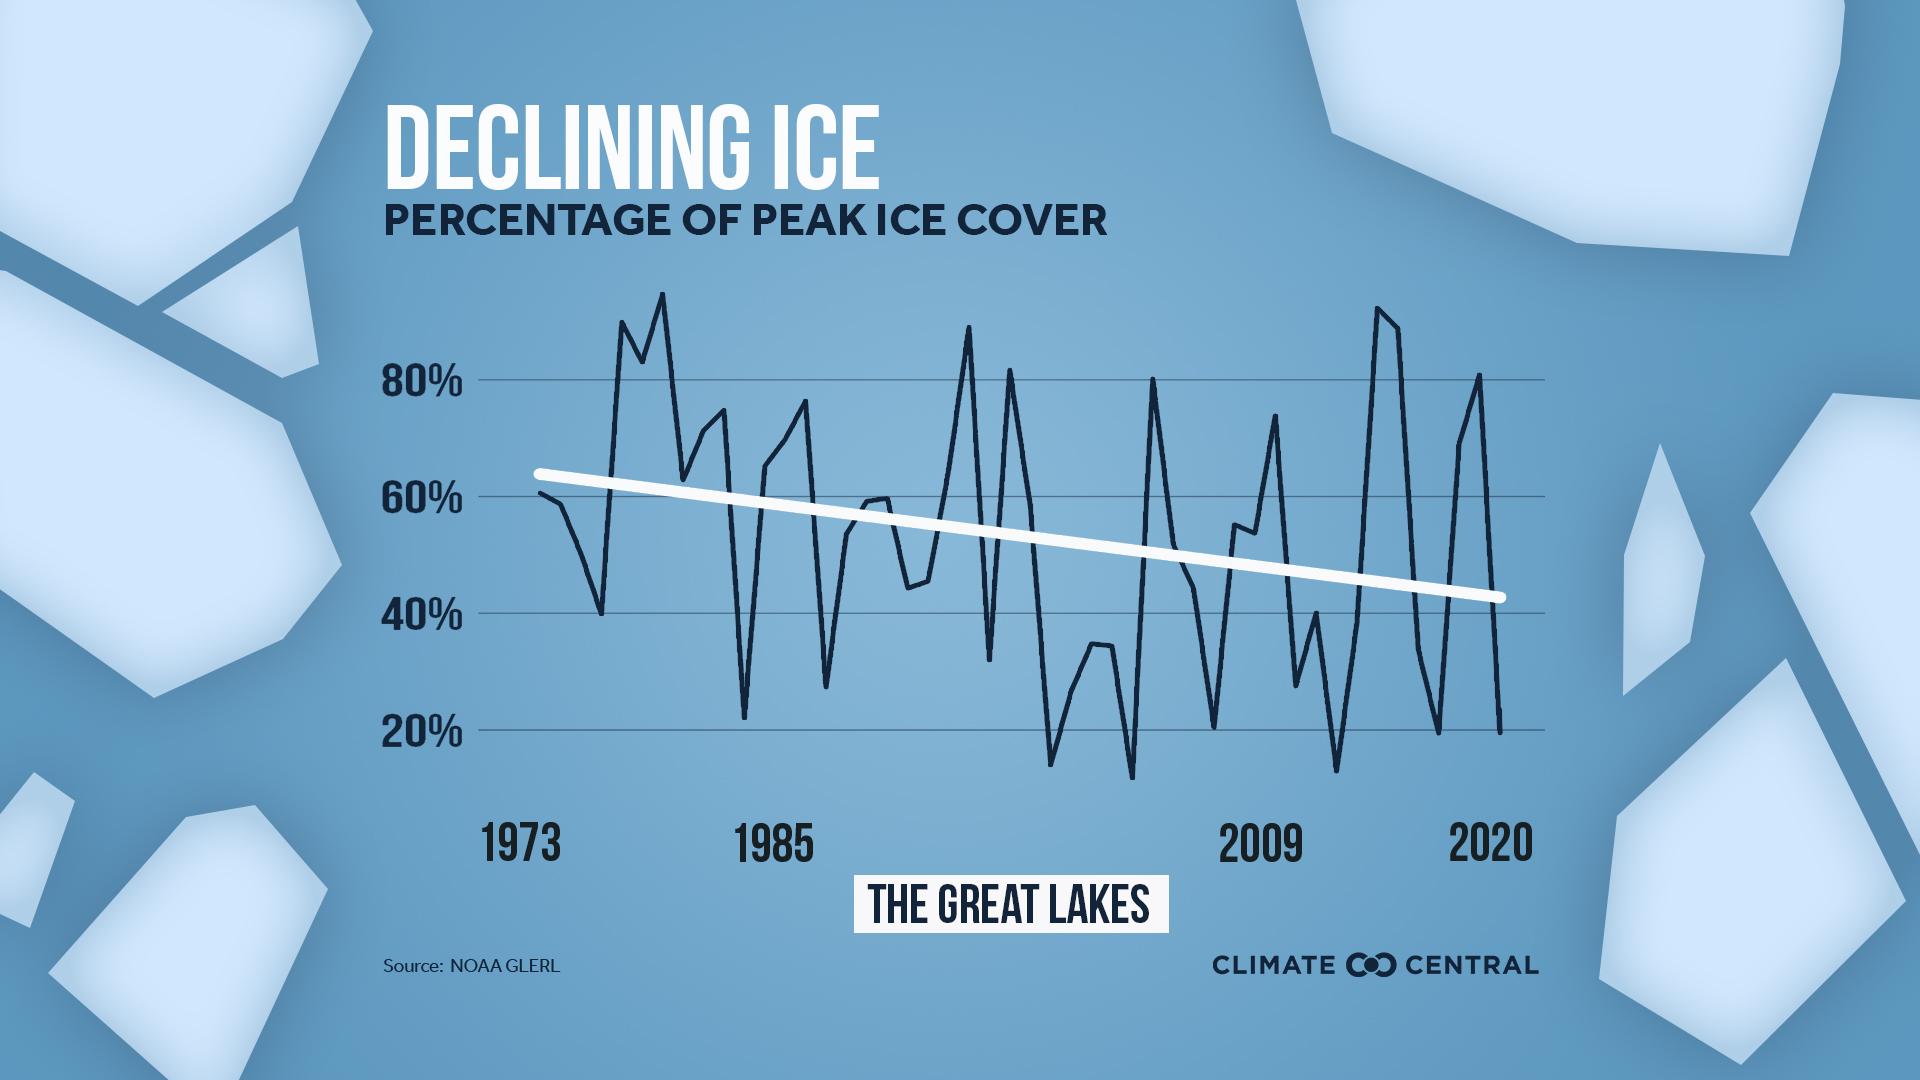 Set 1 - Great Lakes Ice Coverage is Shrinking